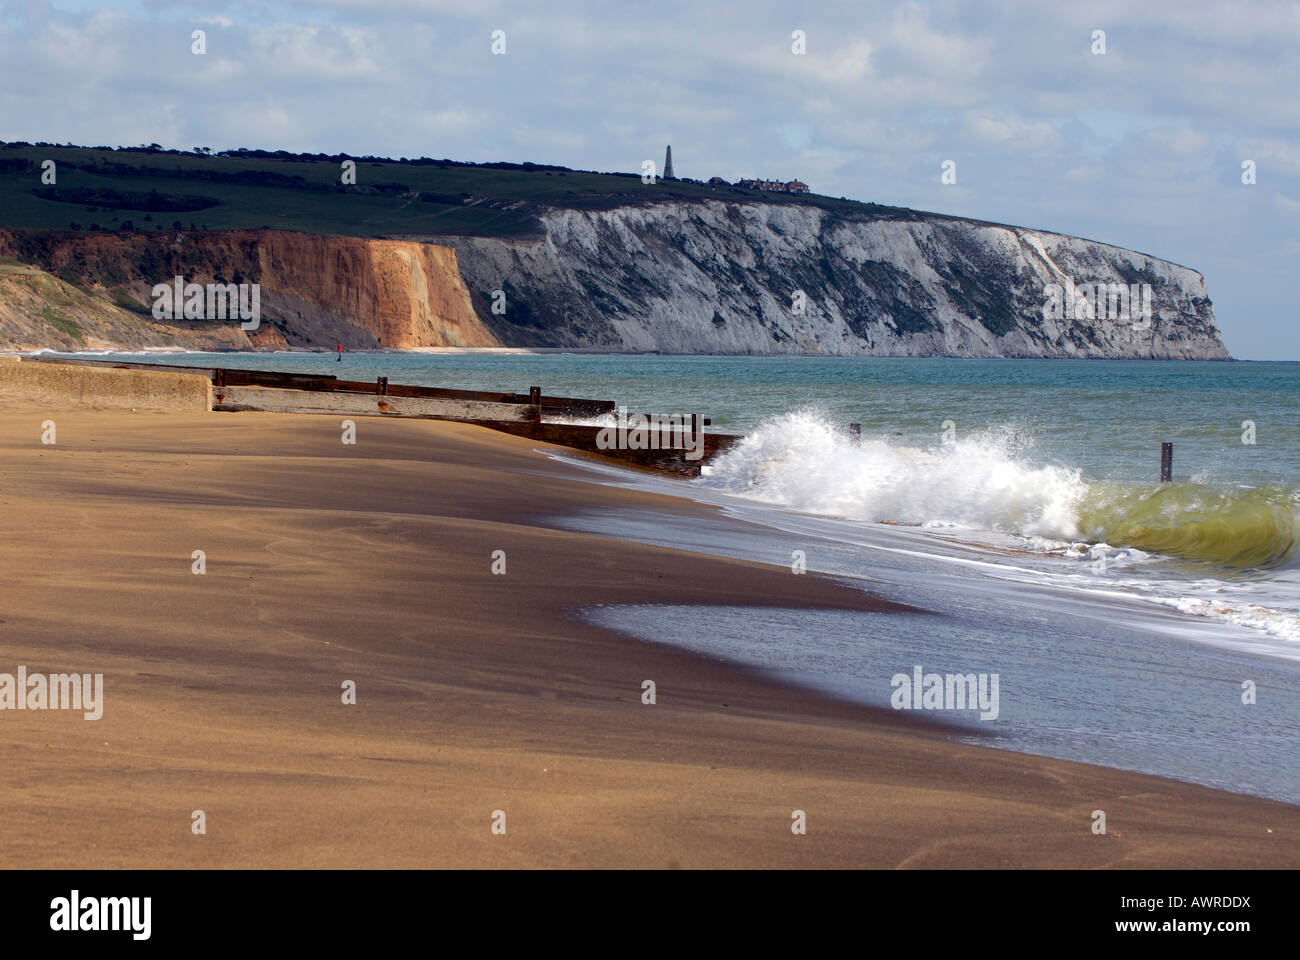 the cliffs and monument at culver sandown shanklin on the isle of wight showing beaches at yaverland and waves crashing on shore Stock Photo